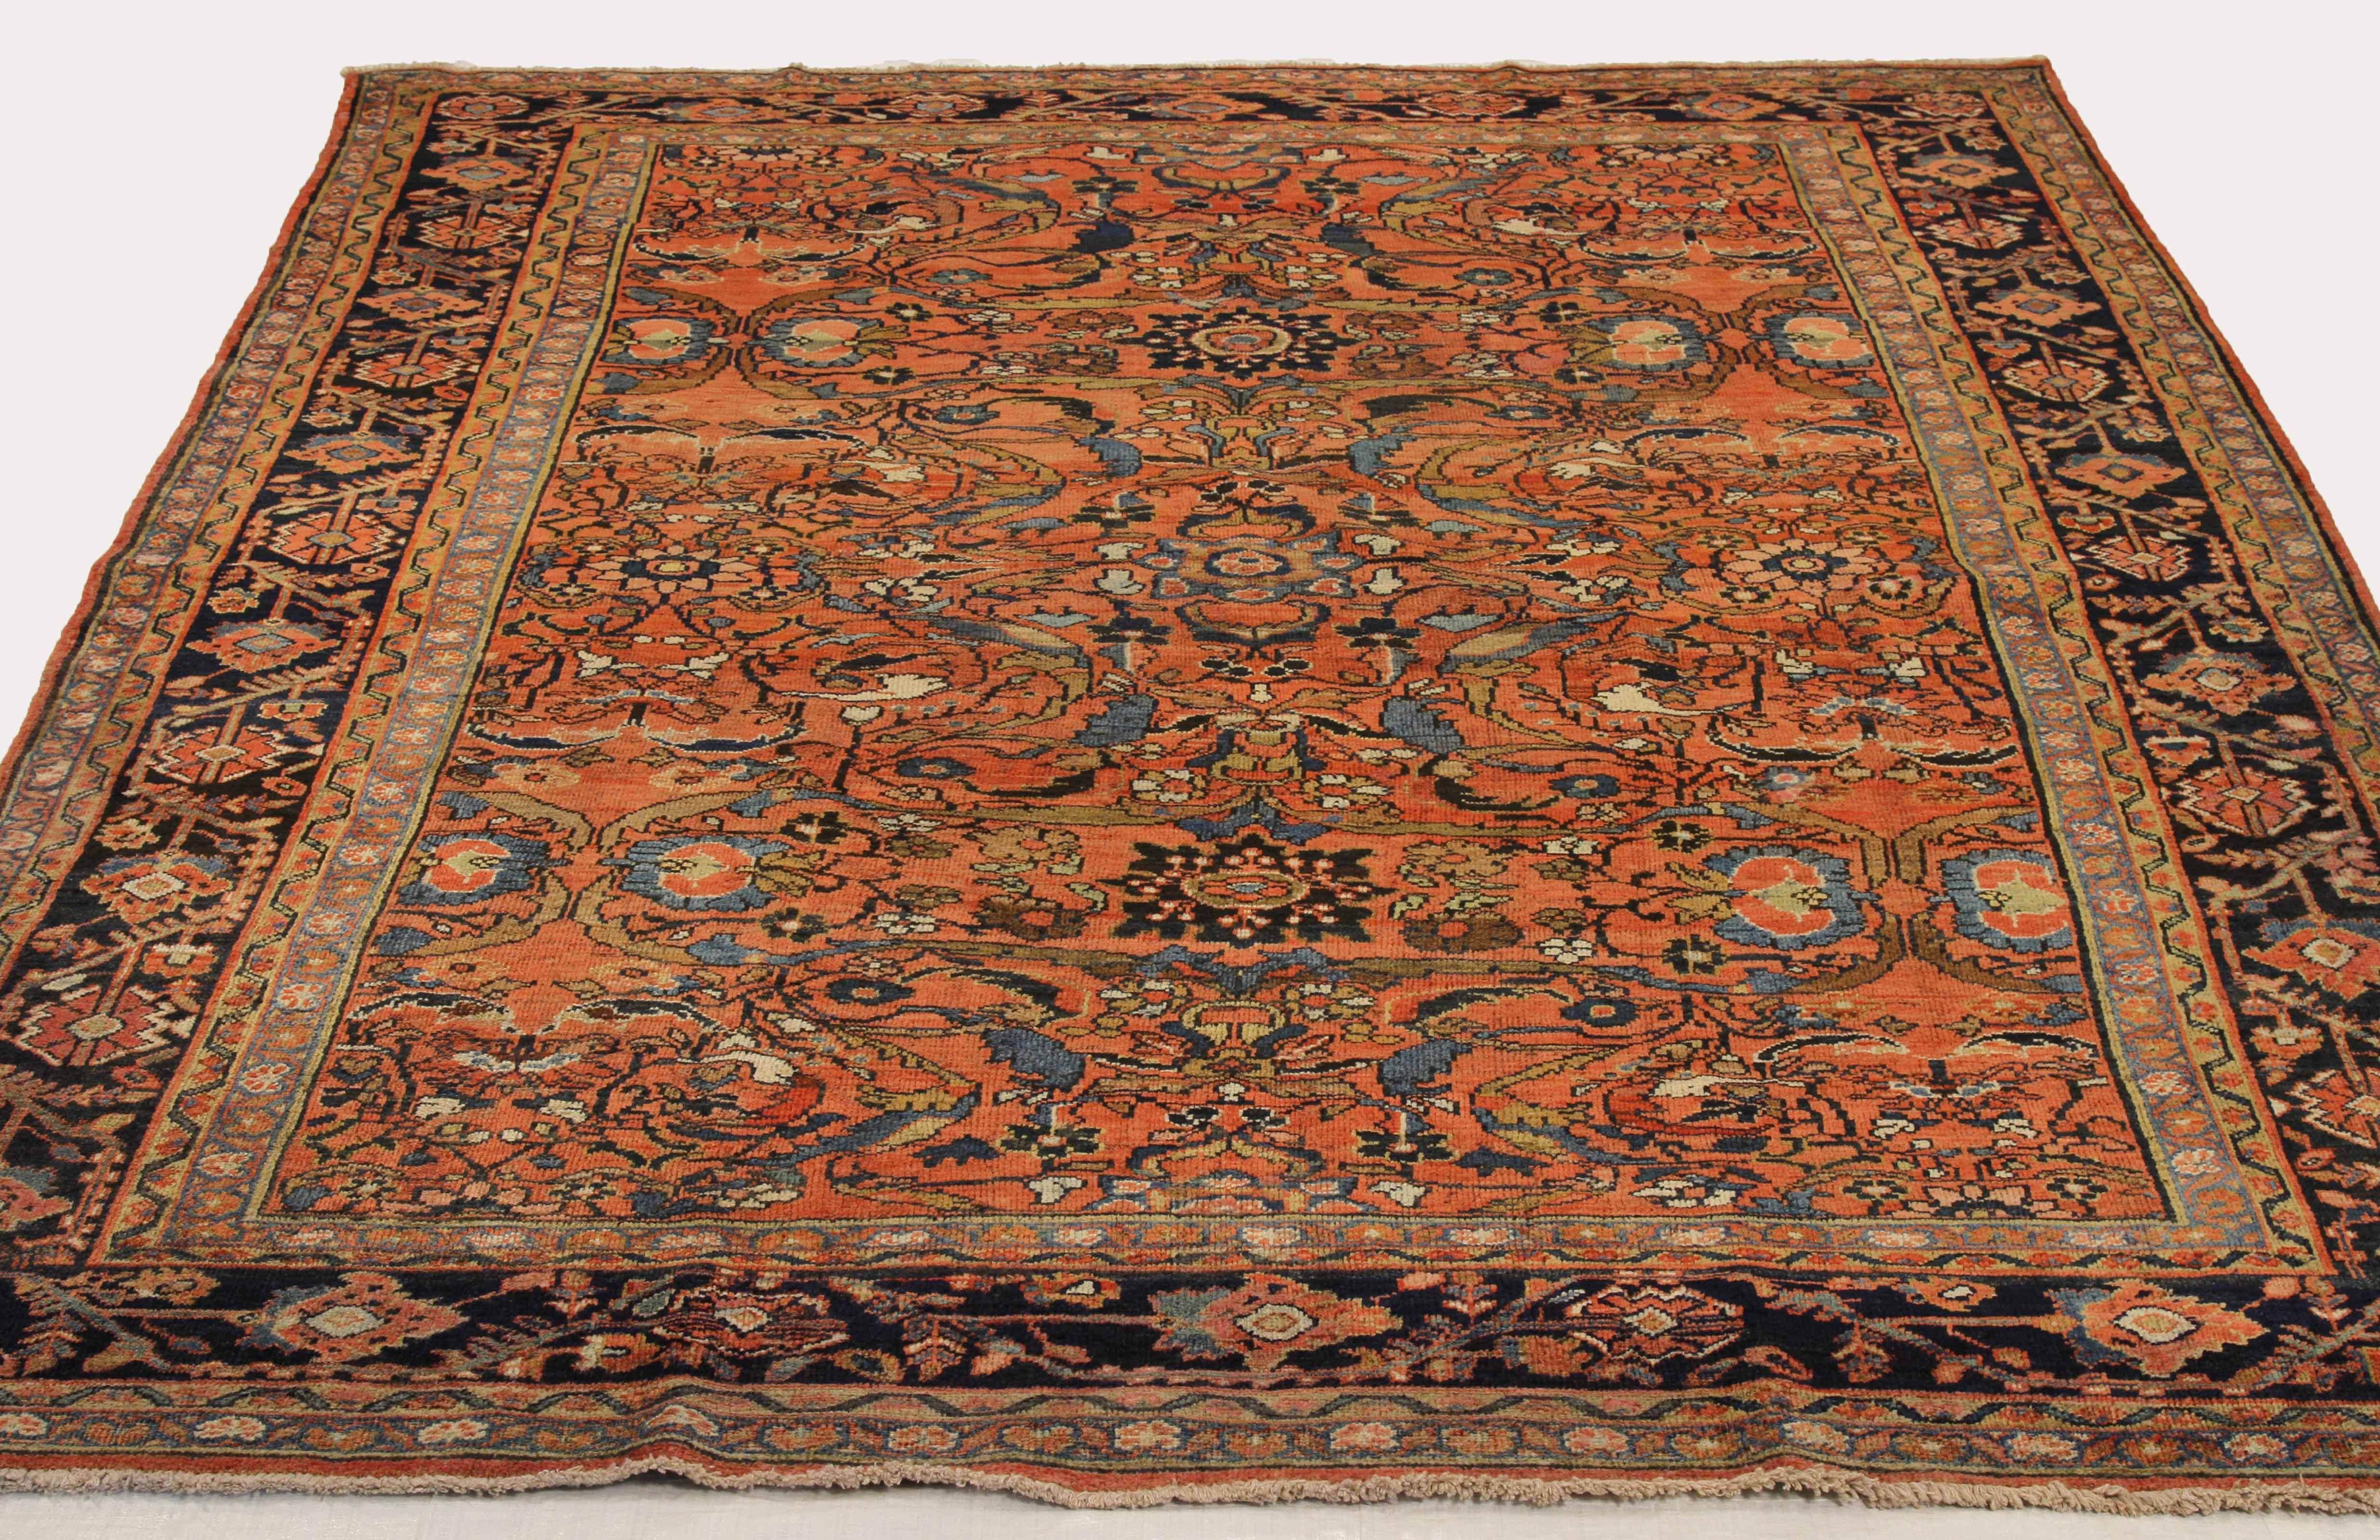 Antique Persian rug handwoven from the finest sheep’s wool and colored with all-natural vegetable dyes that are safe for humans and pets. It’s a traditional Mahal design featuring floral details in green and blue over a red center field. It’s a